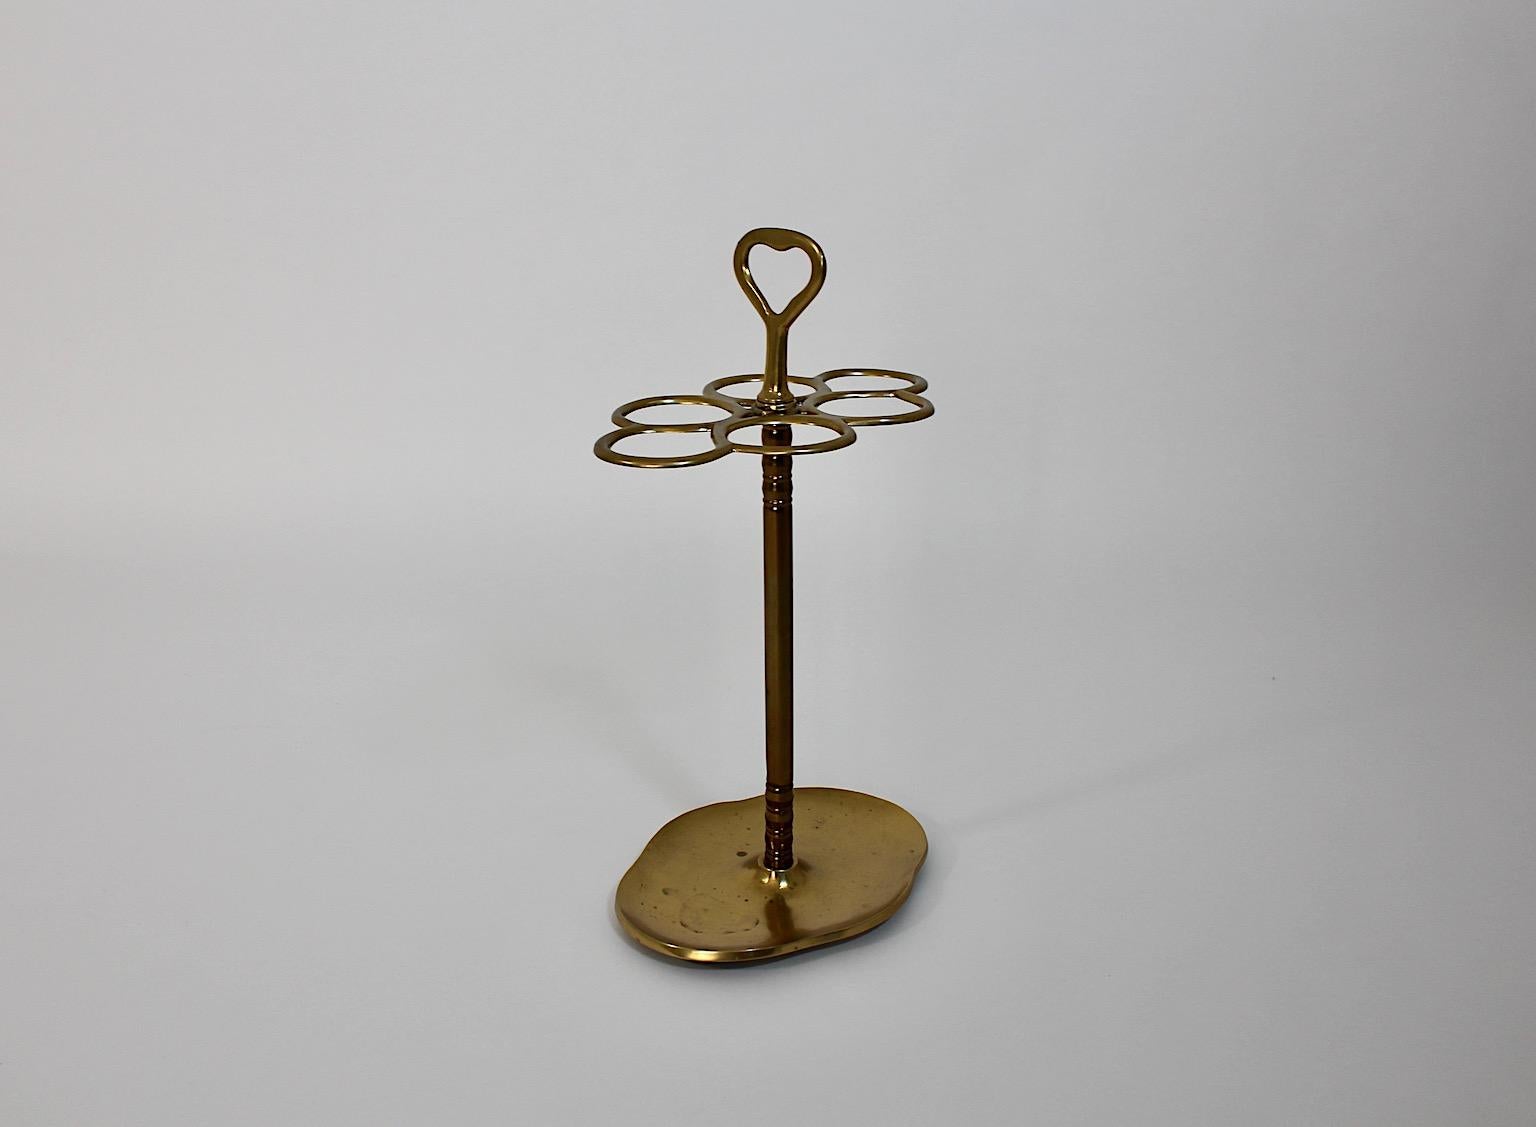 Hollywood Regency Style Vintage Brass Umbrella Stand Cane Holder 1970s Italy For Sale 1